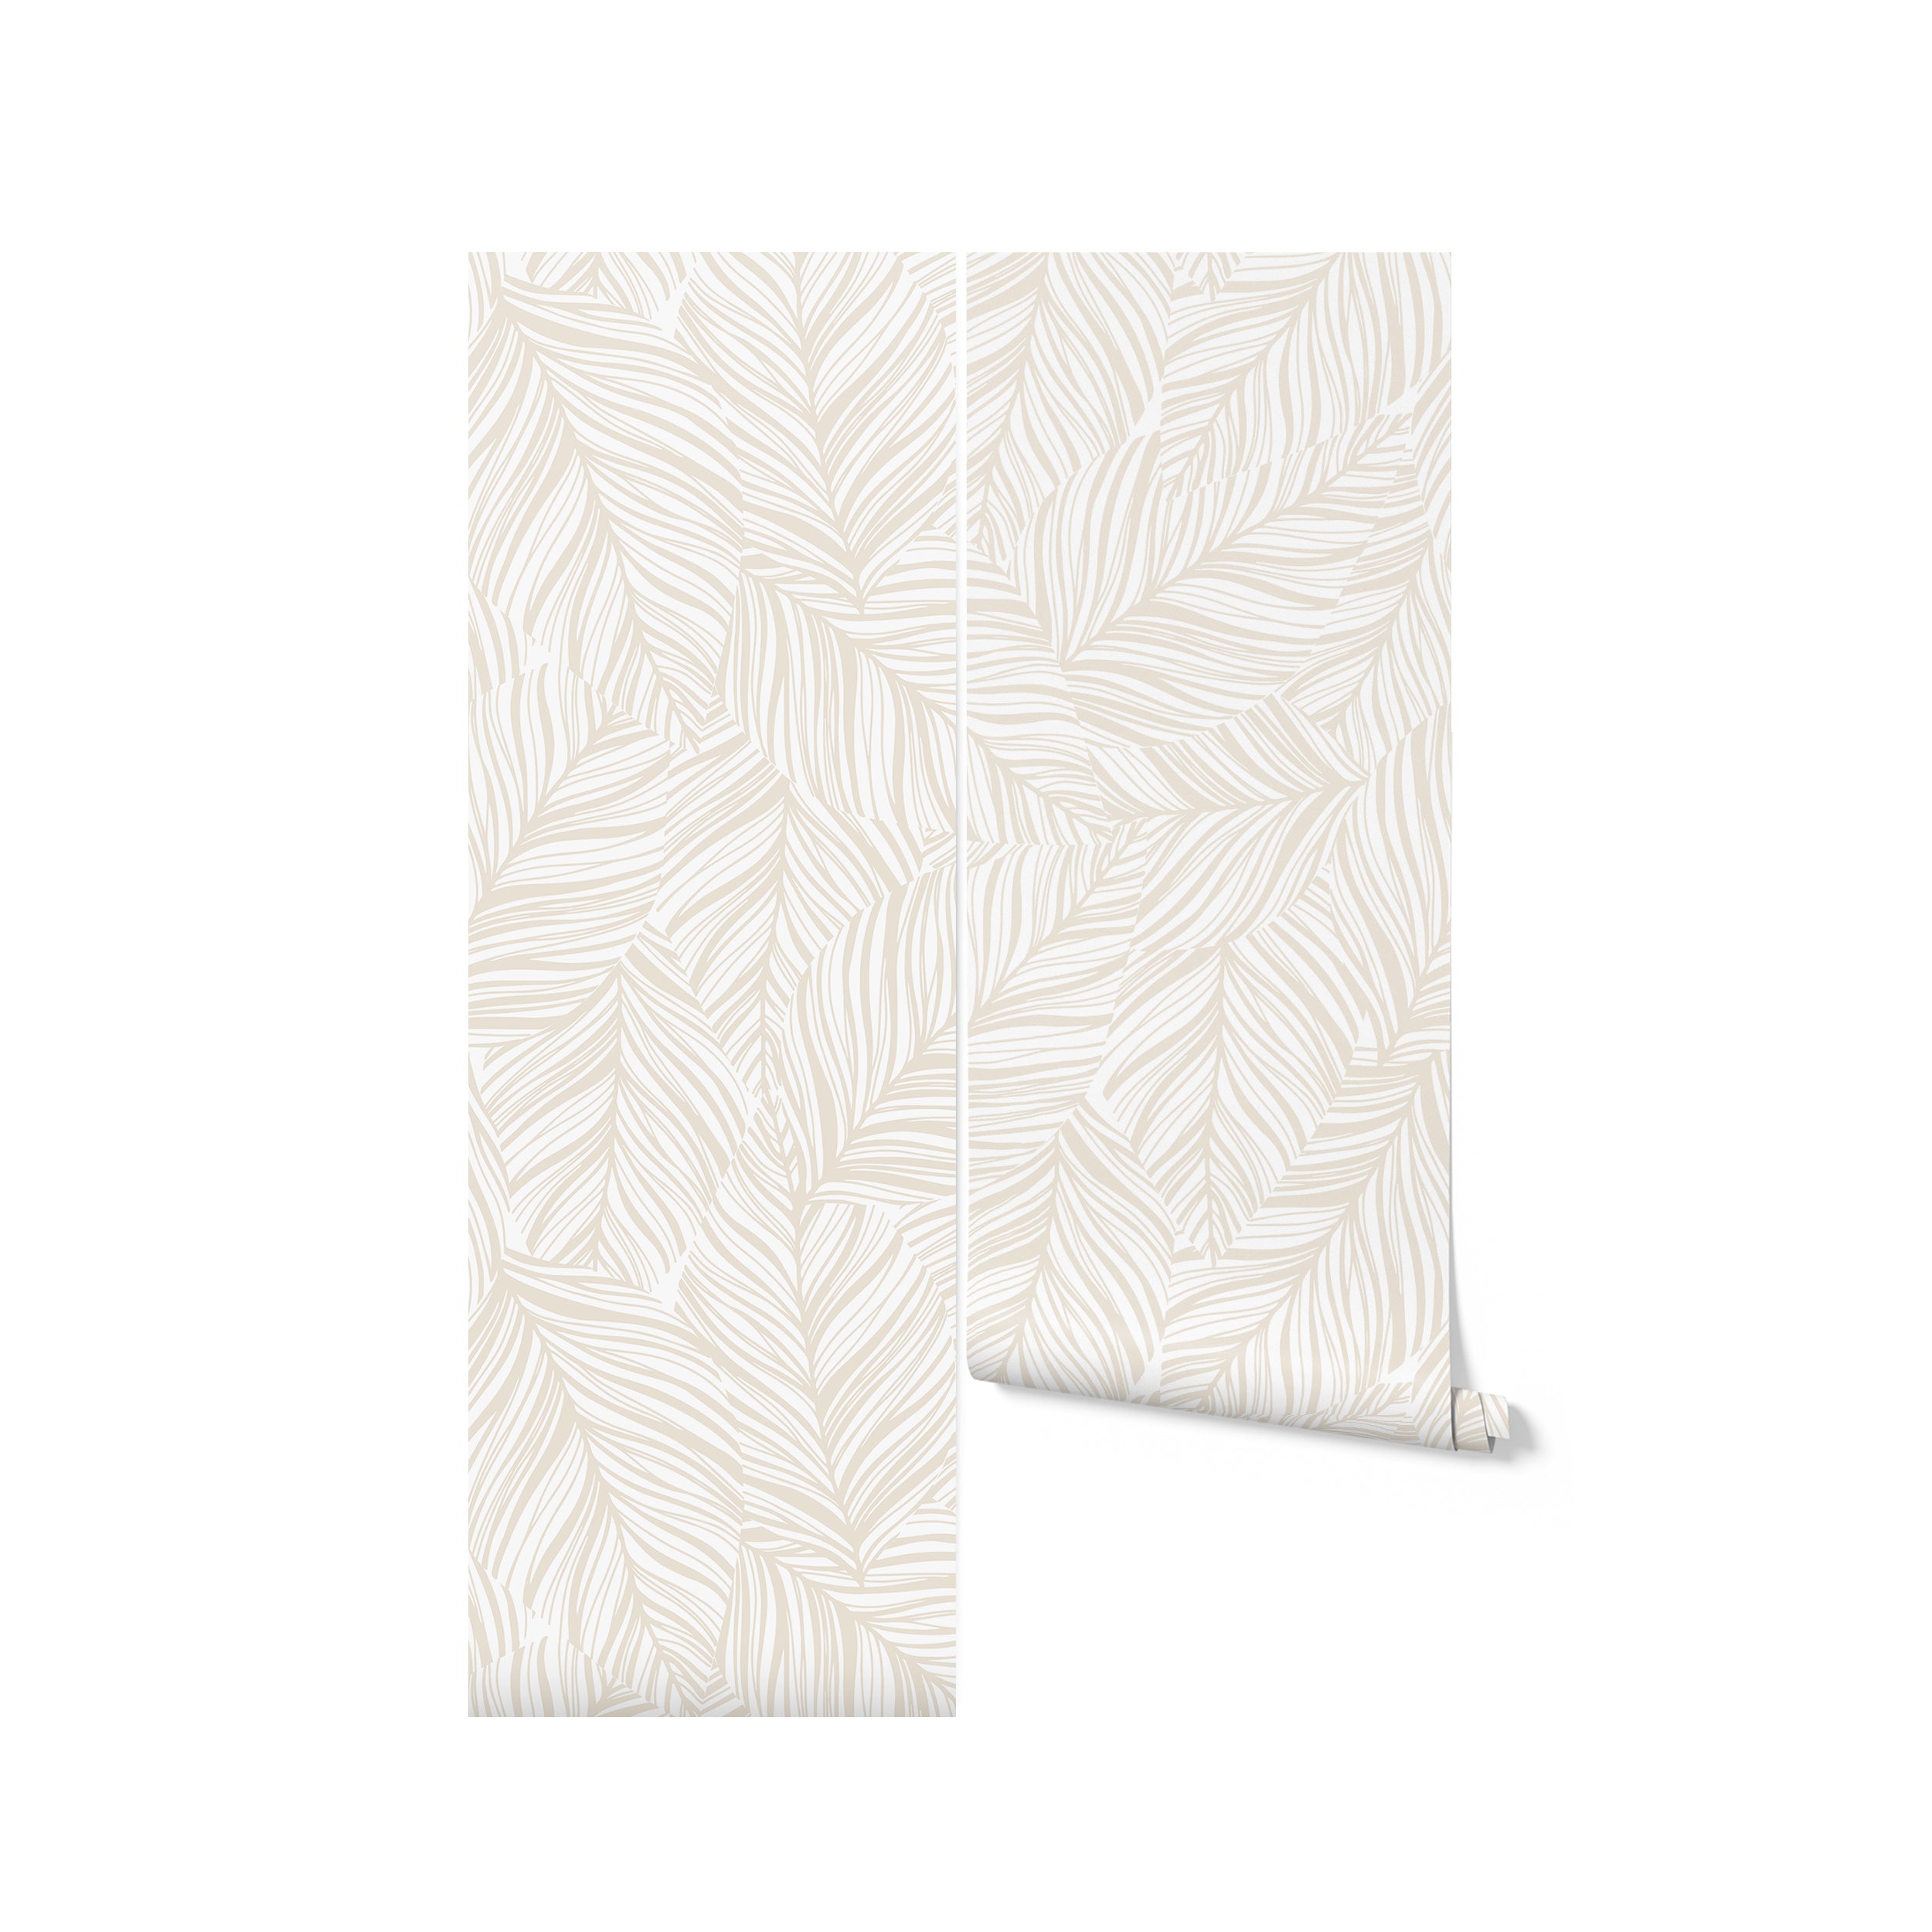 A digitally rendered image of a roll of abstract leaf-patterned wallpaper leaning against a plain background. The wallpaper displays an intricate design of ecru leaves with detailed line work that emphasizes a natural, rhythmic flow. This image represents the product ready for use in interior design projects.